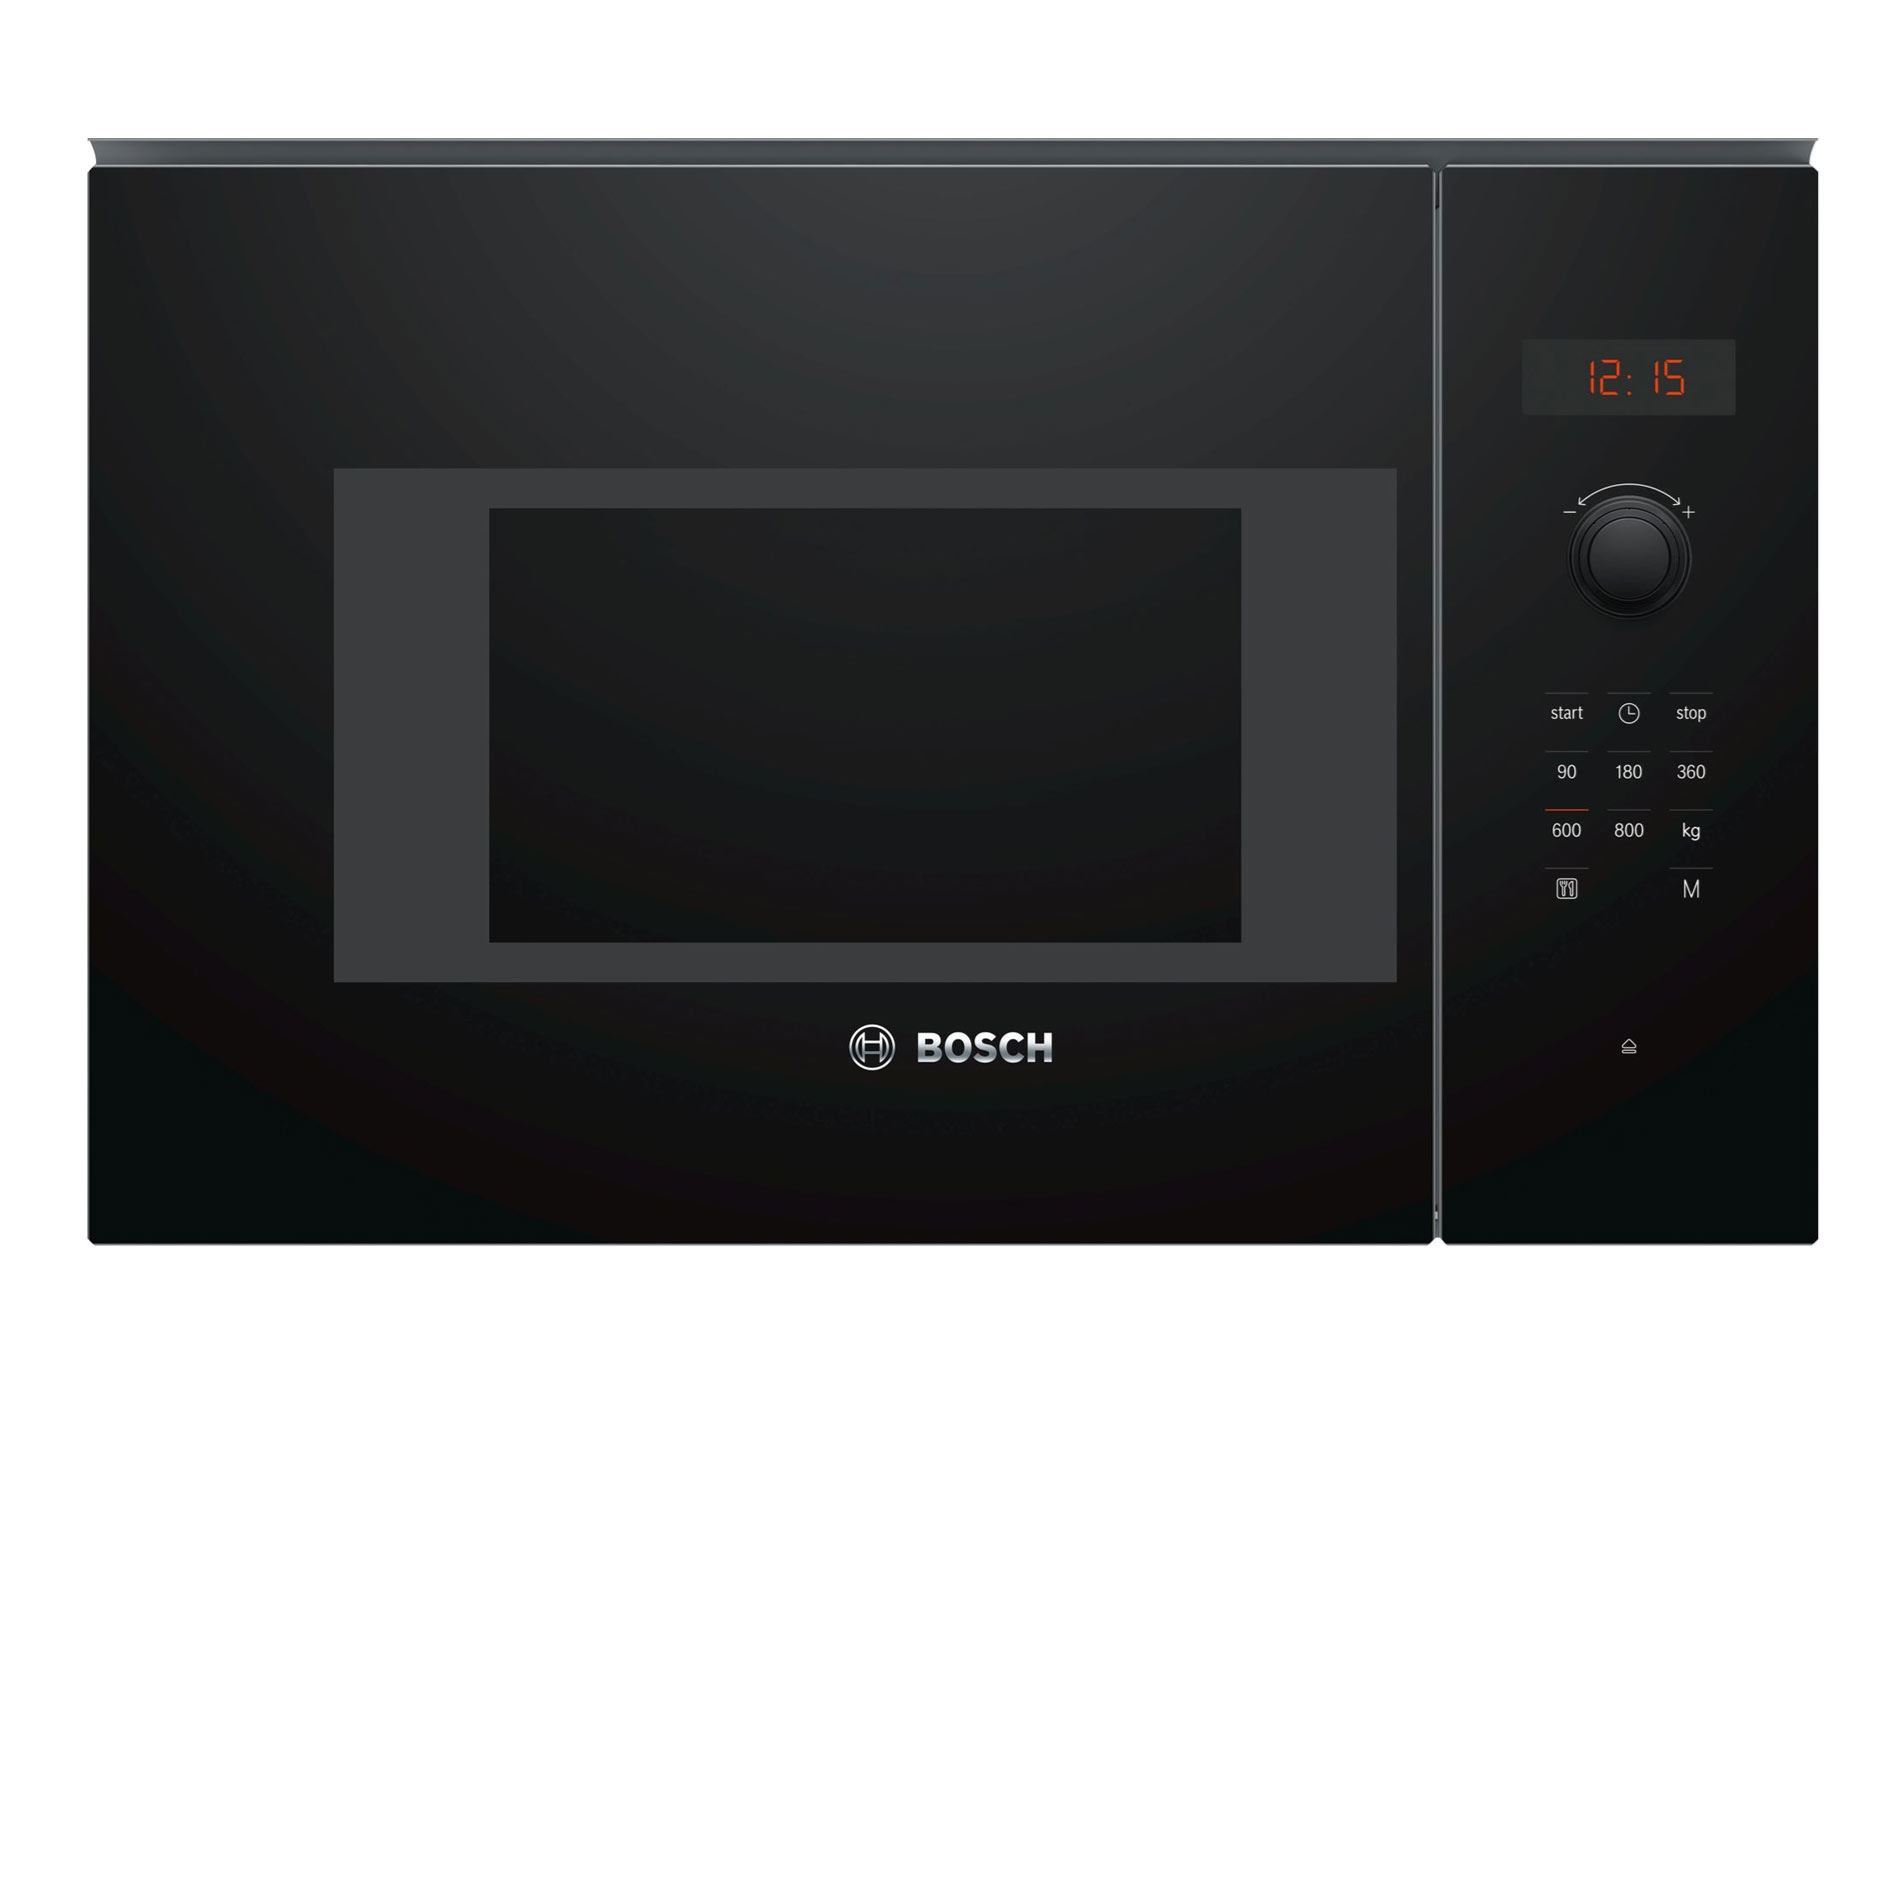 Picture of Bosch BFL523MB0B Black Built-in Microwave